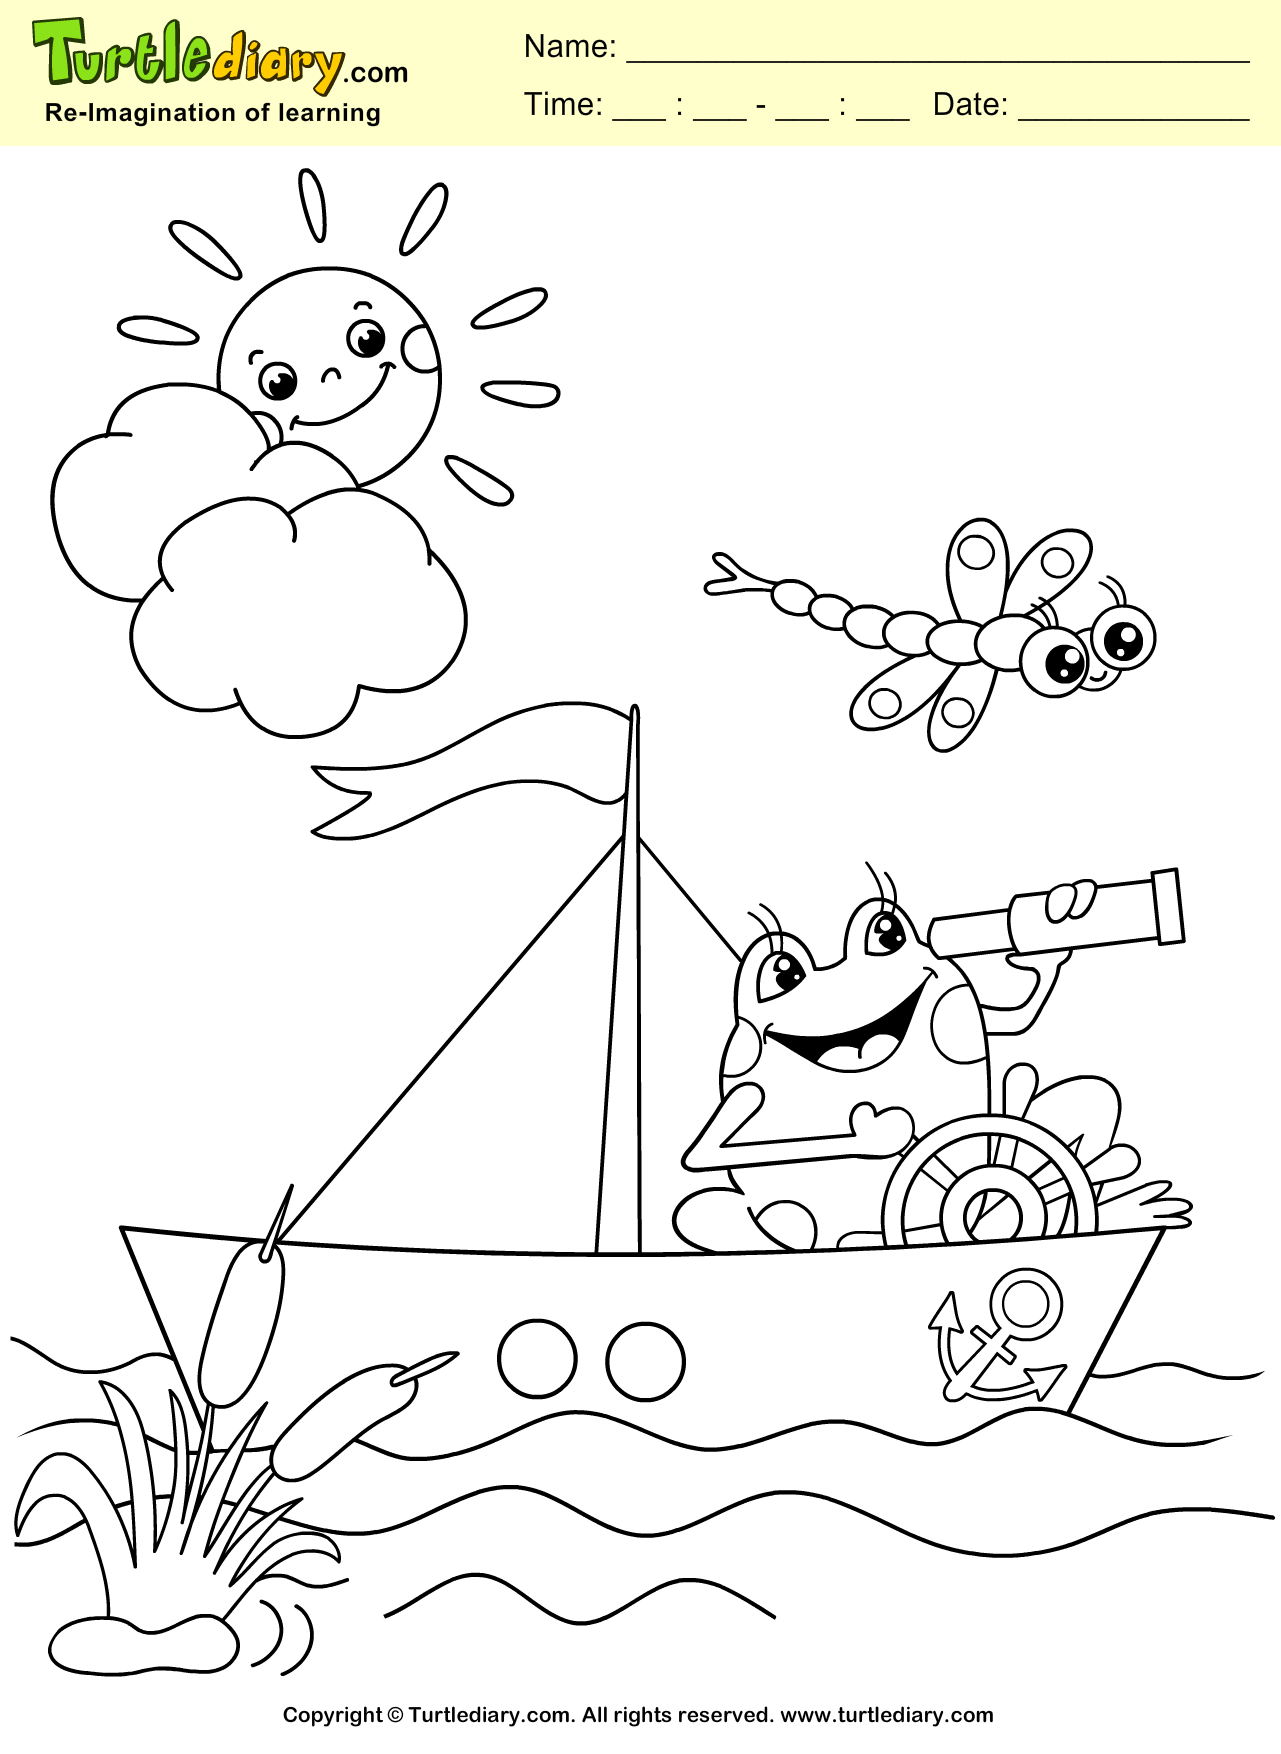 Frog and Boat Coloring Page